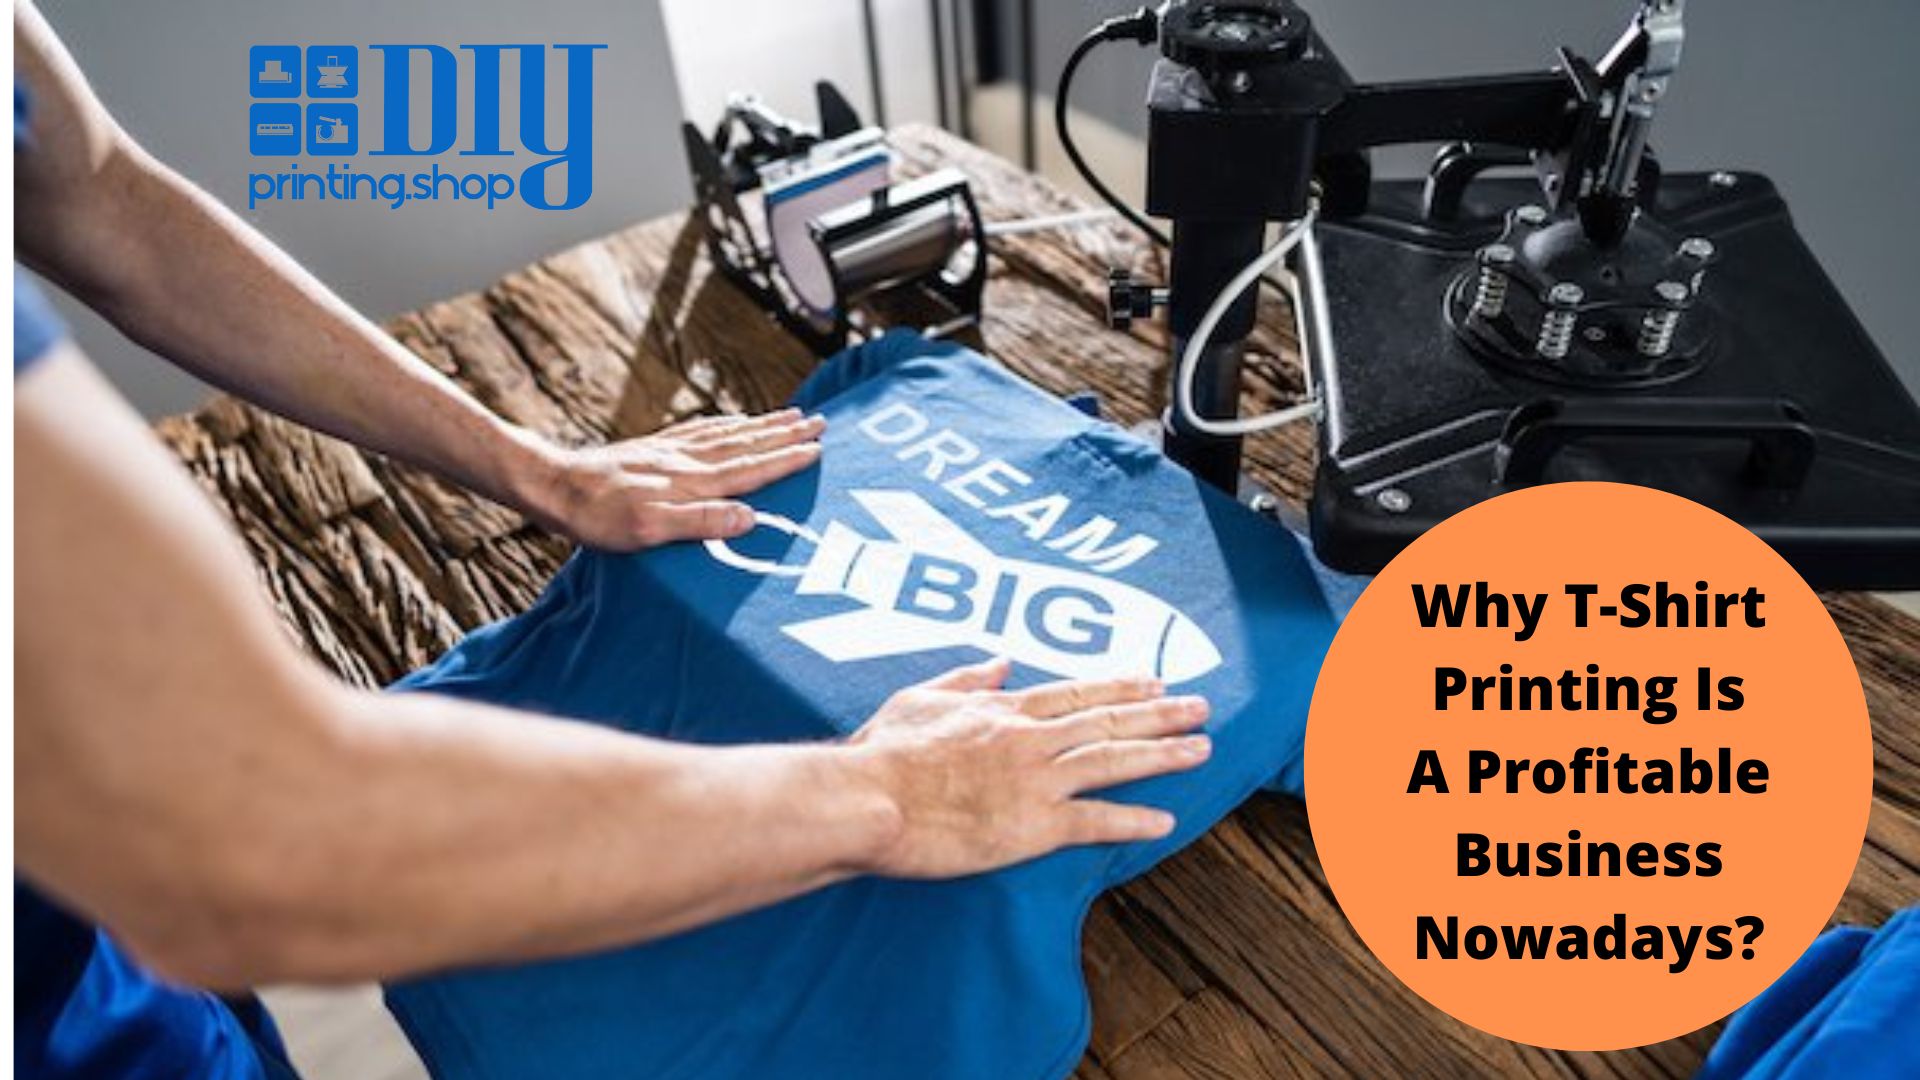 Starting a T-Shirt Printing Business? Here's What You Need to Know